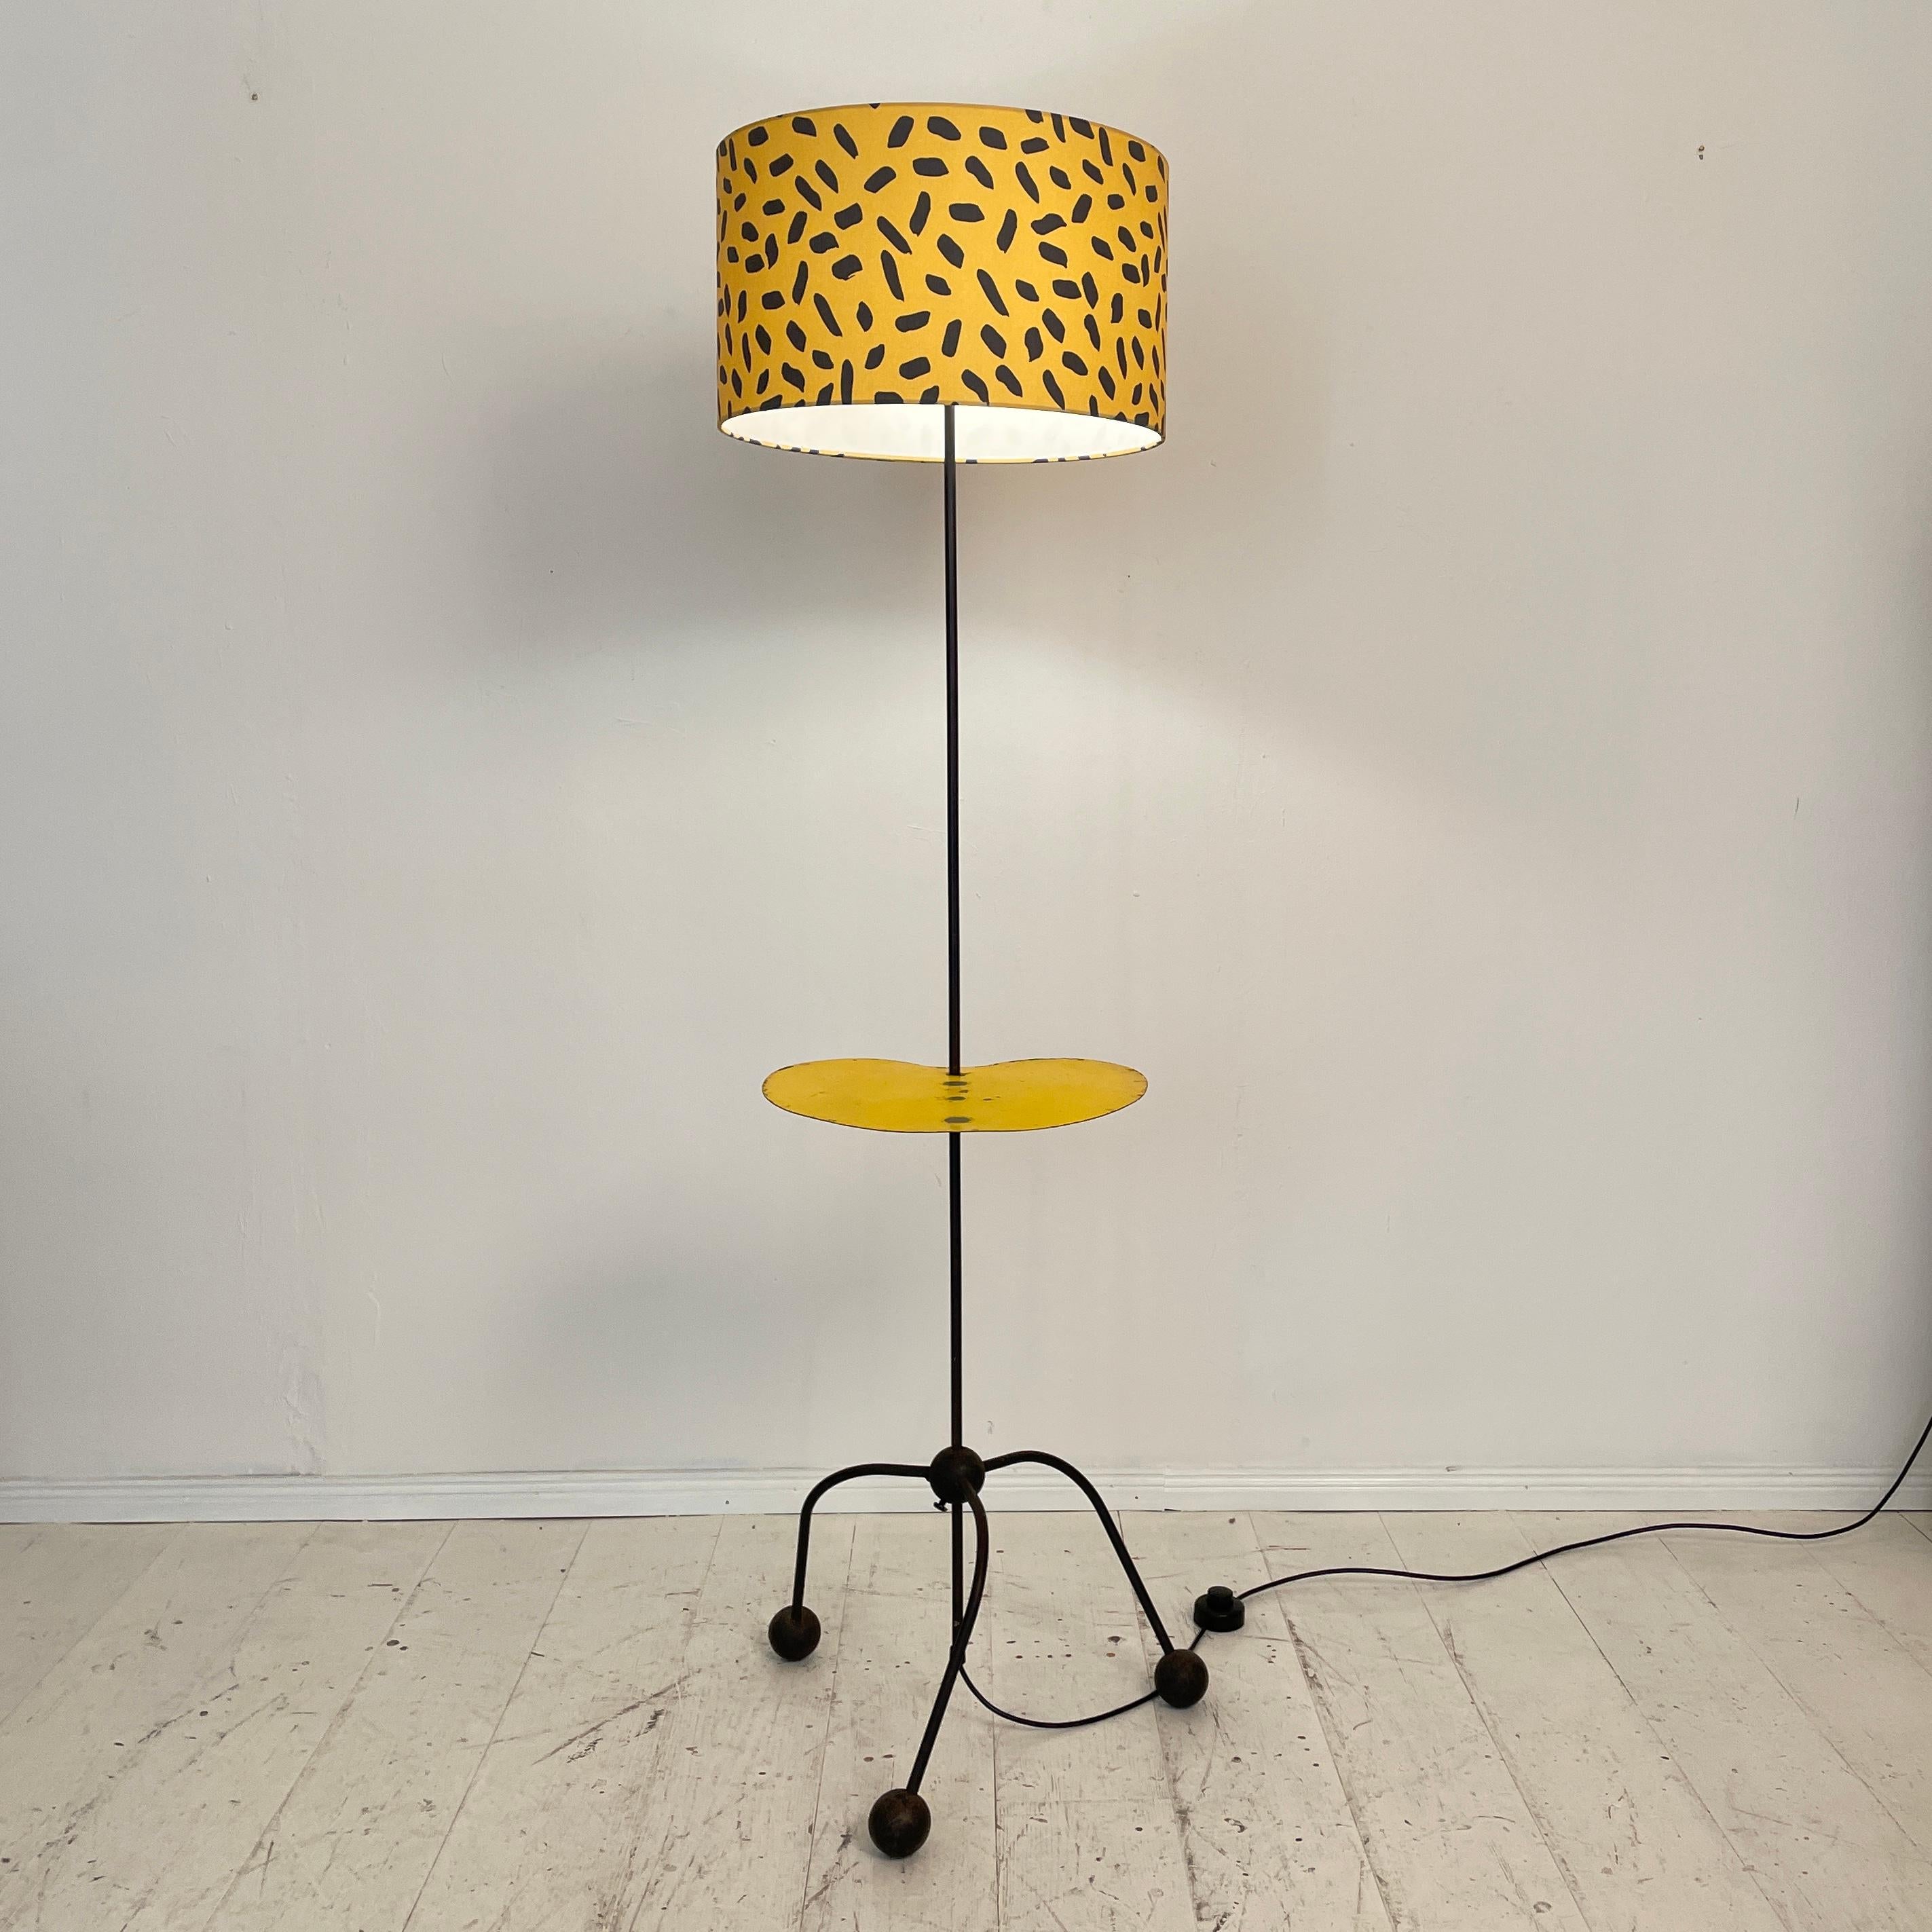 Mid-Century French Floor Lamp Made of Black Metal with Yellow Fabric Shade, 1950 For Sale 6